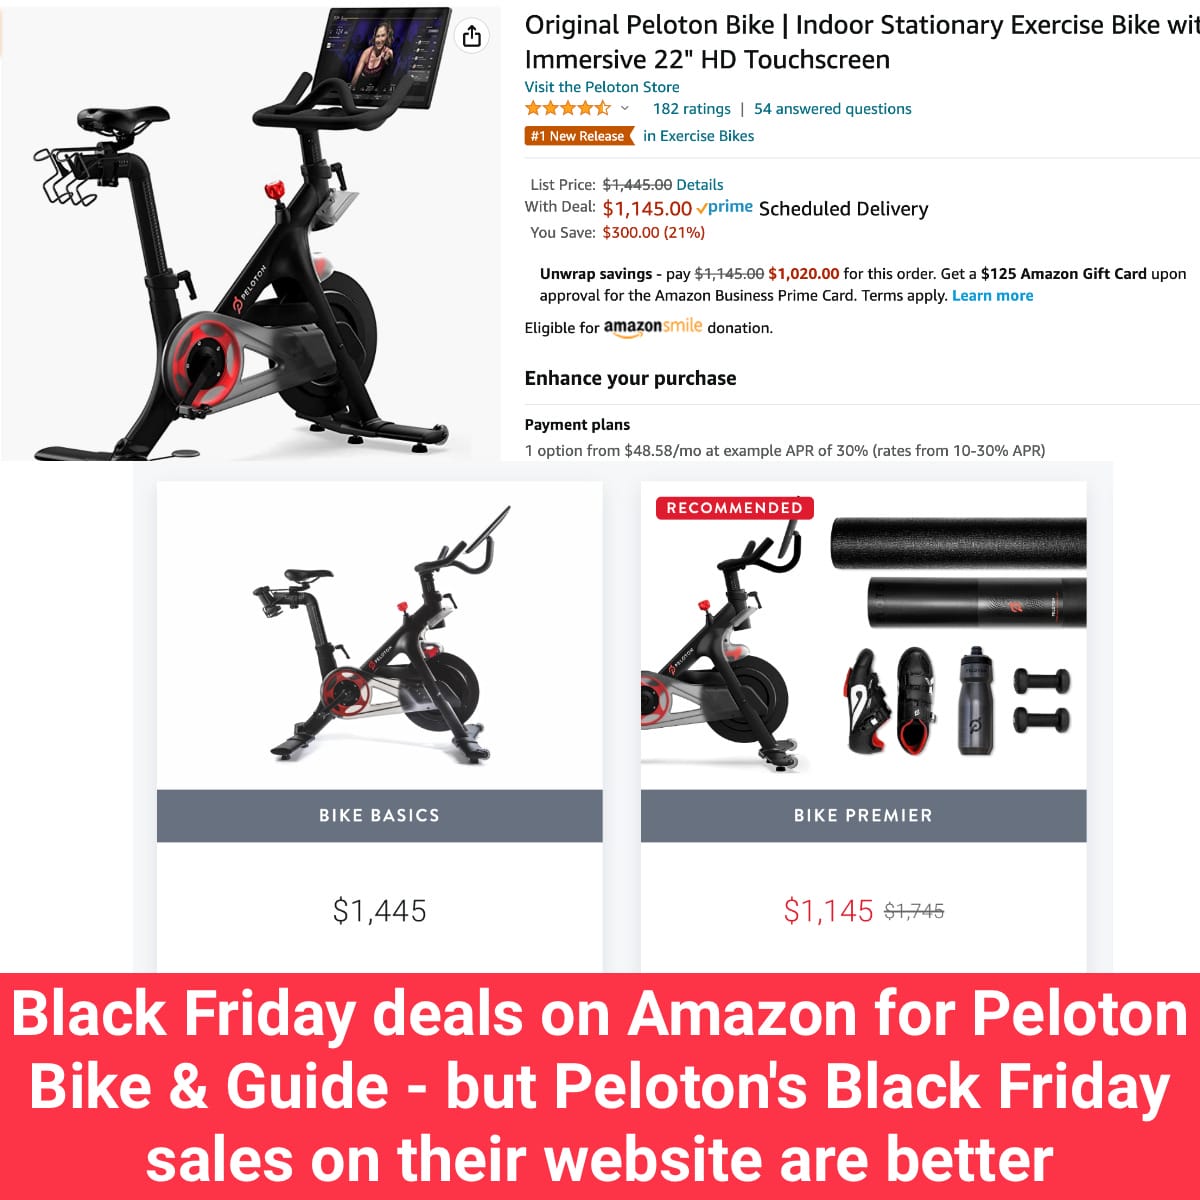 Black Friday Sales on Amazon for Peloton Bike and Peloton Guide in 2022